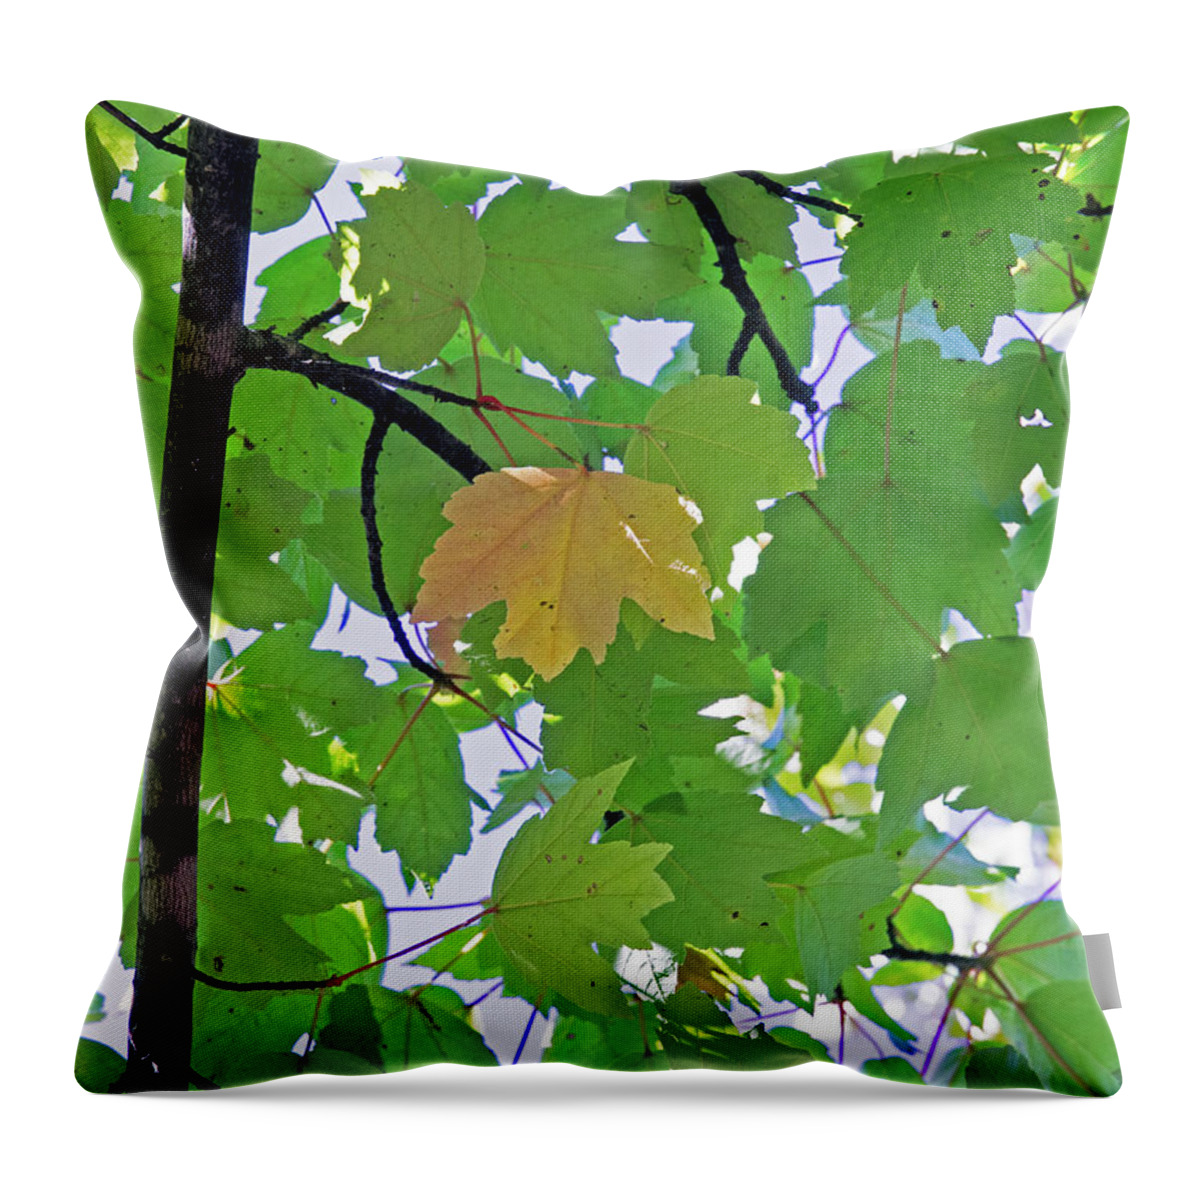 Background Throw Pillow featuring the photograph A Canopy Of Leaves by David Desautel